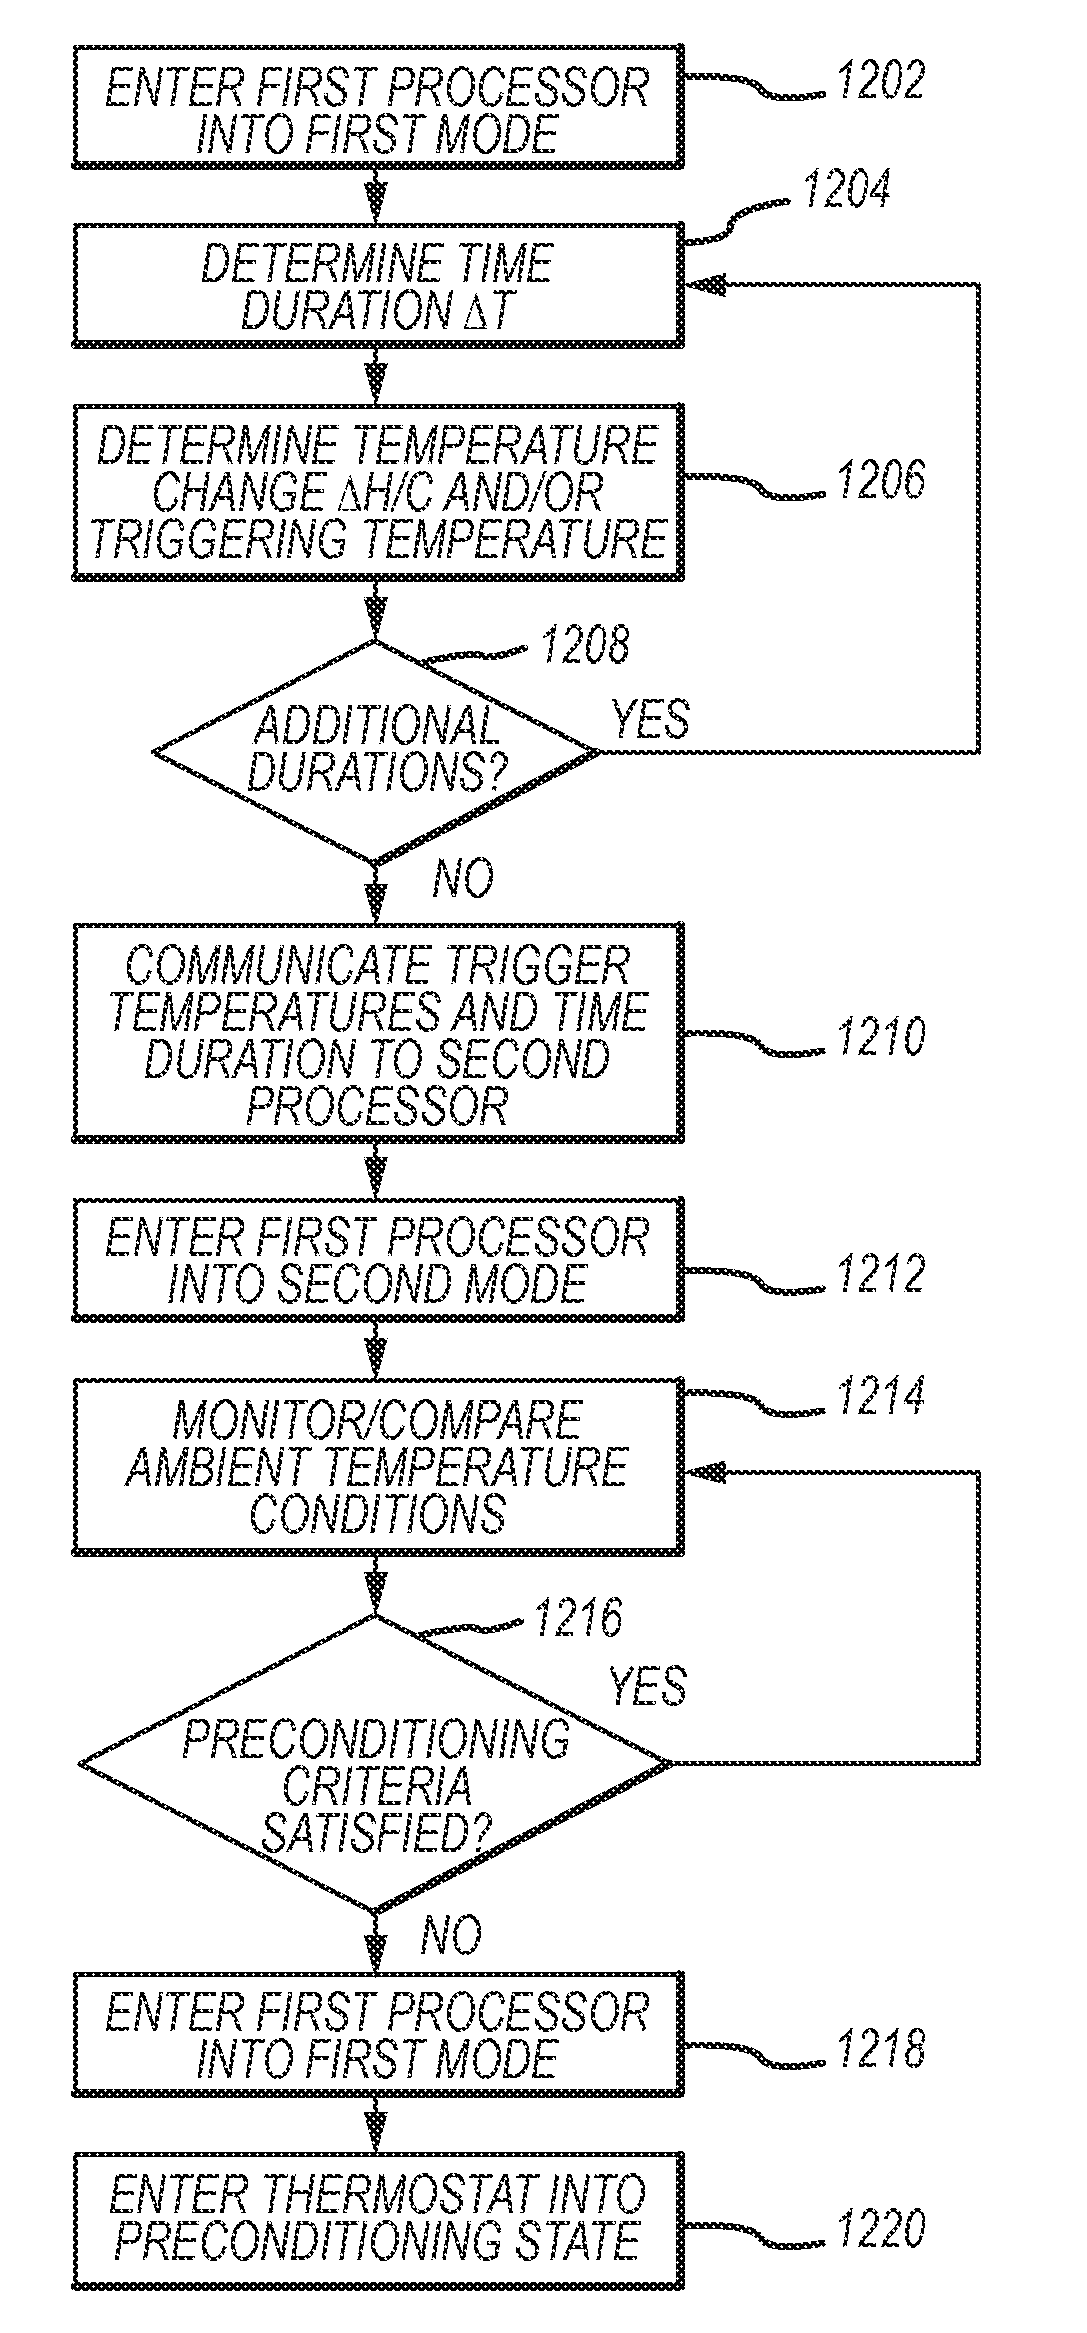 Preconditioning controls and methods for an environmental control system